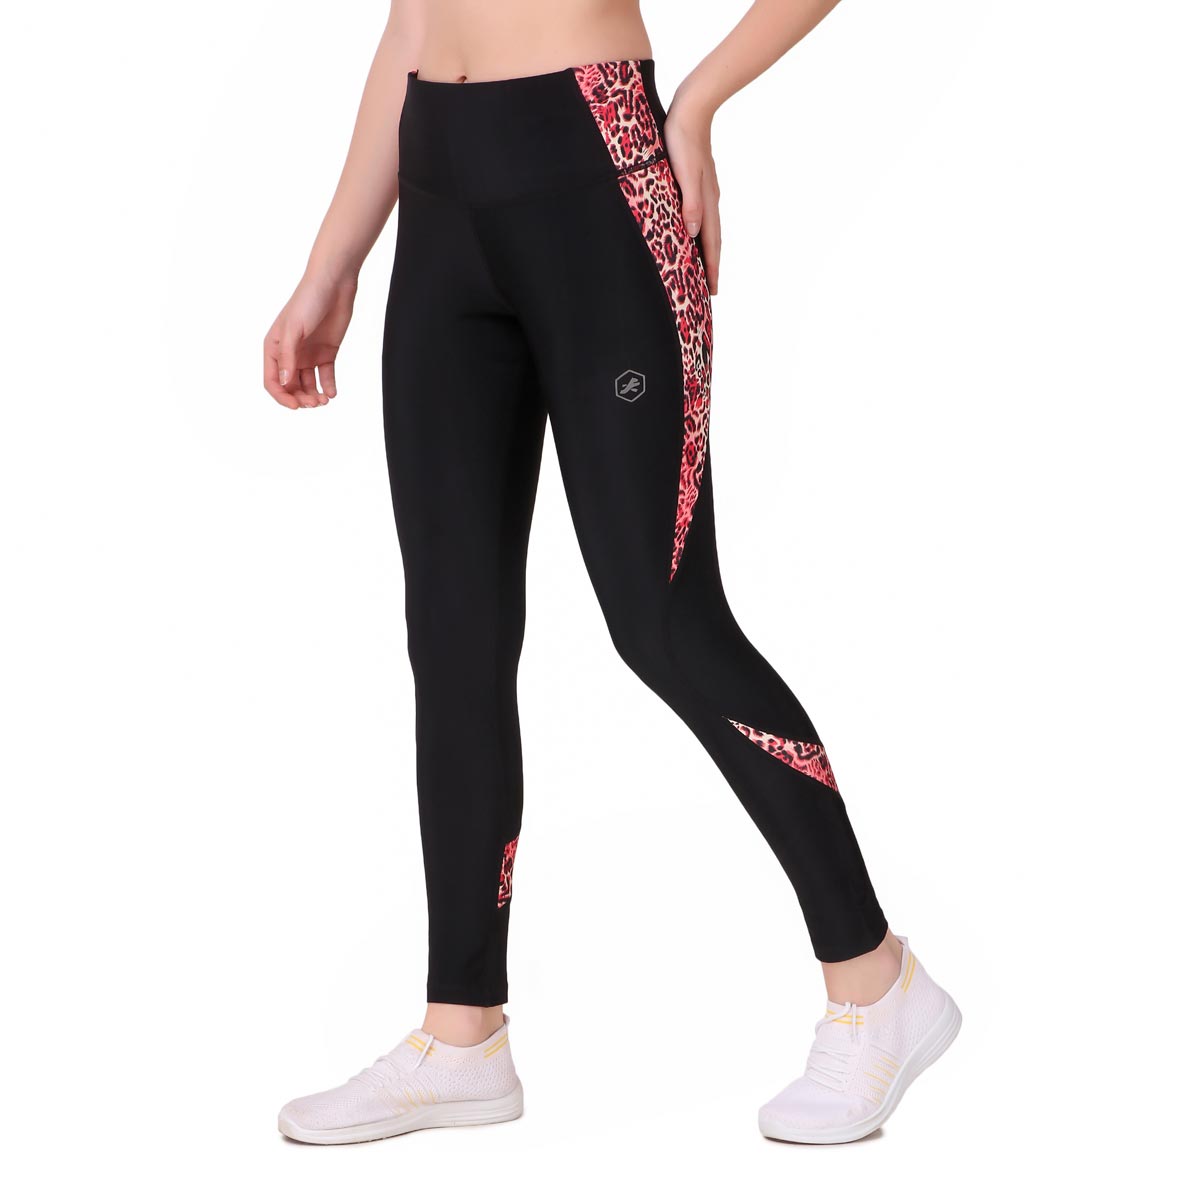 Performance Legging Tights For Women (Leopard Red)